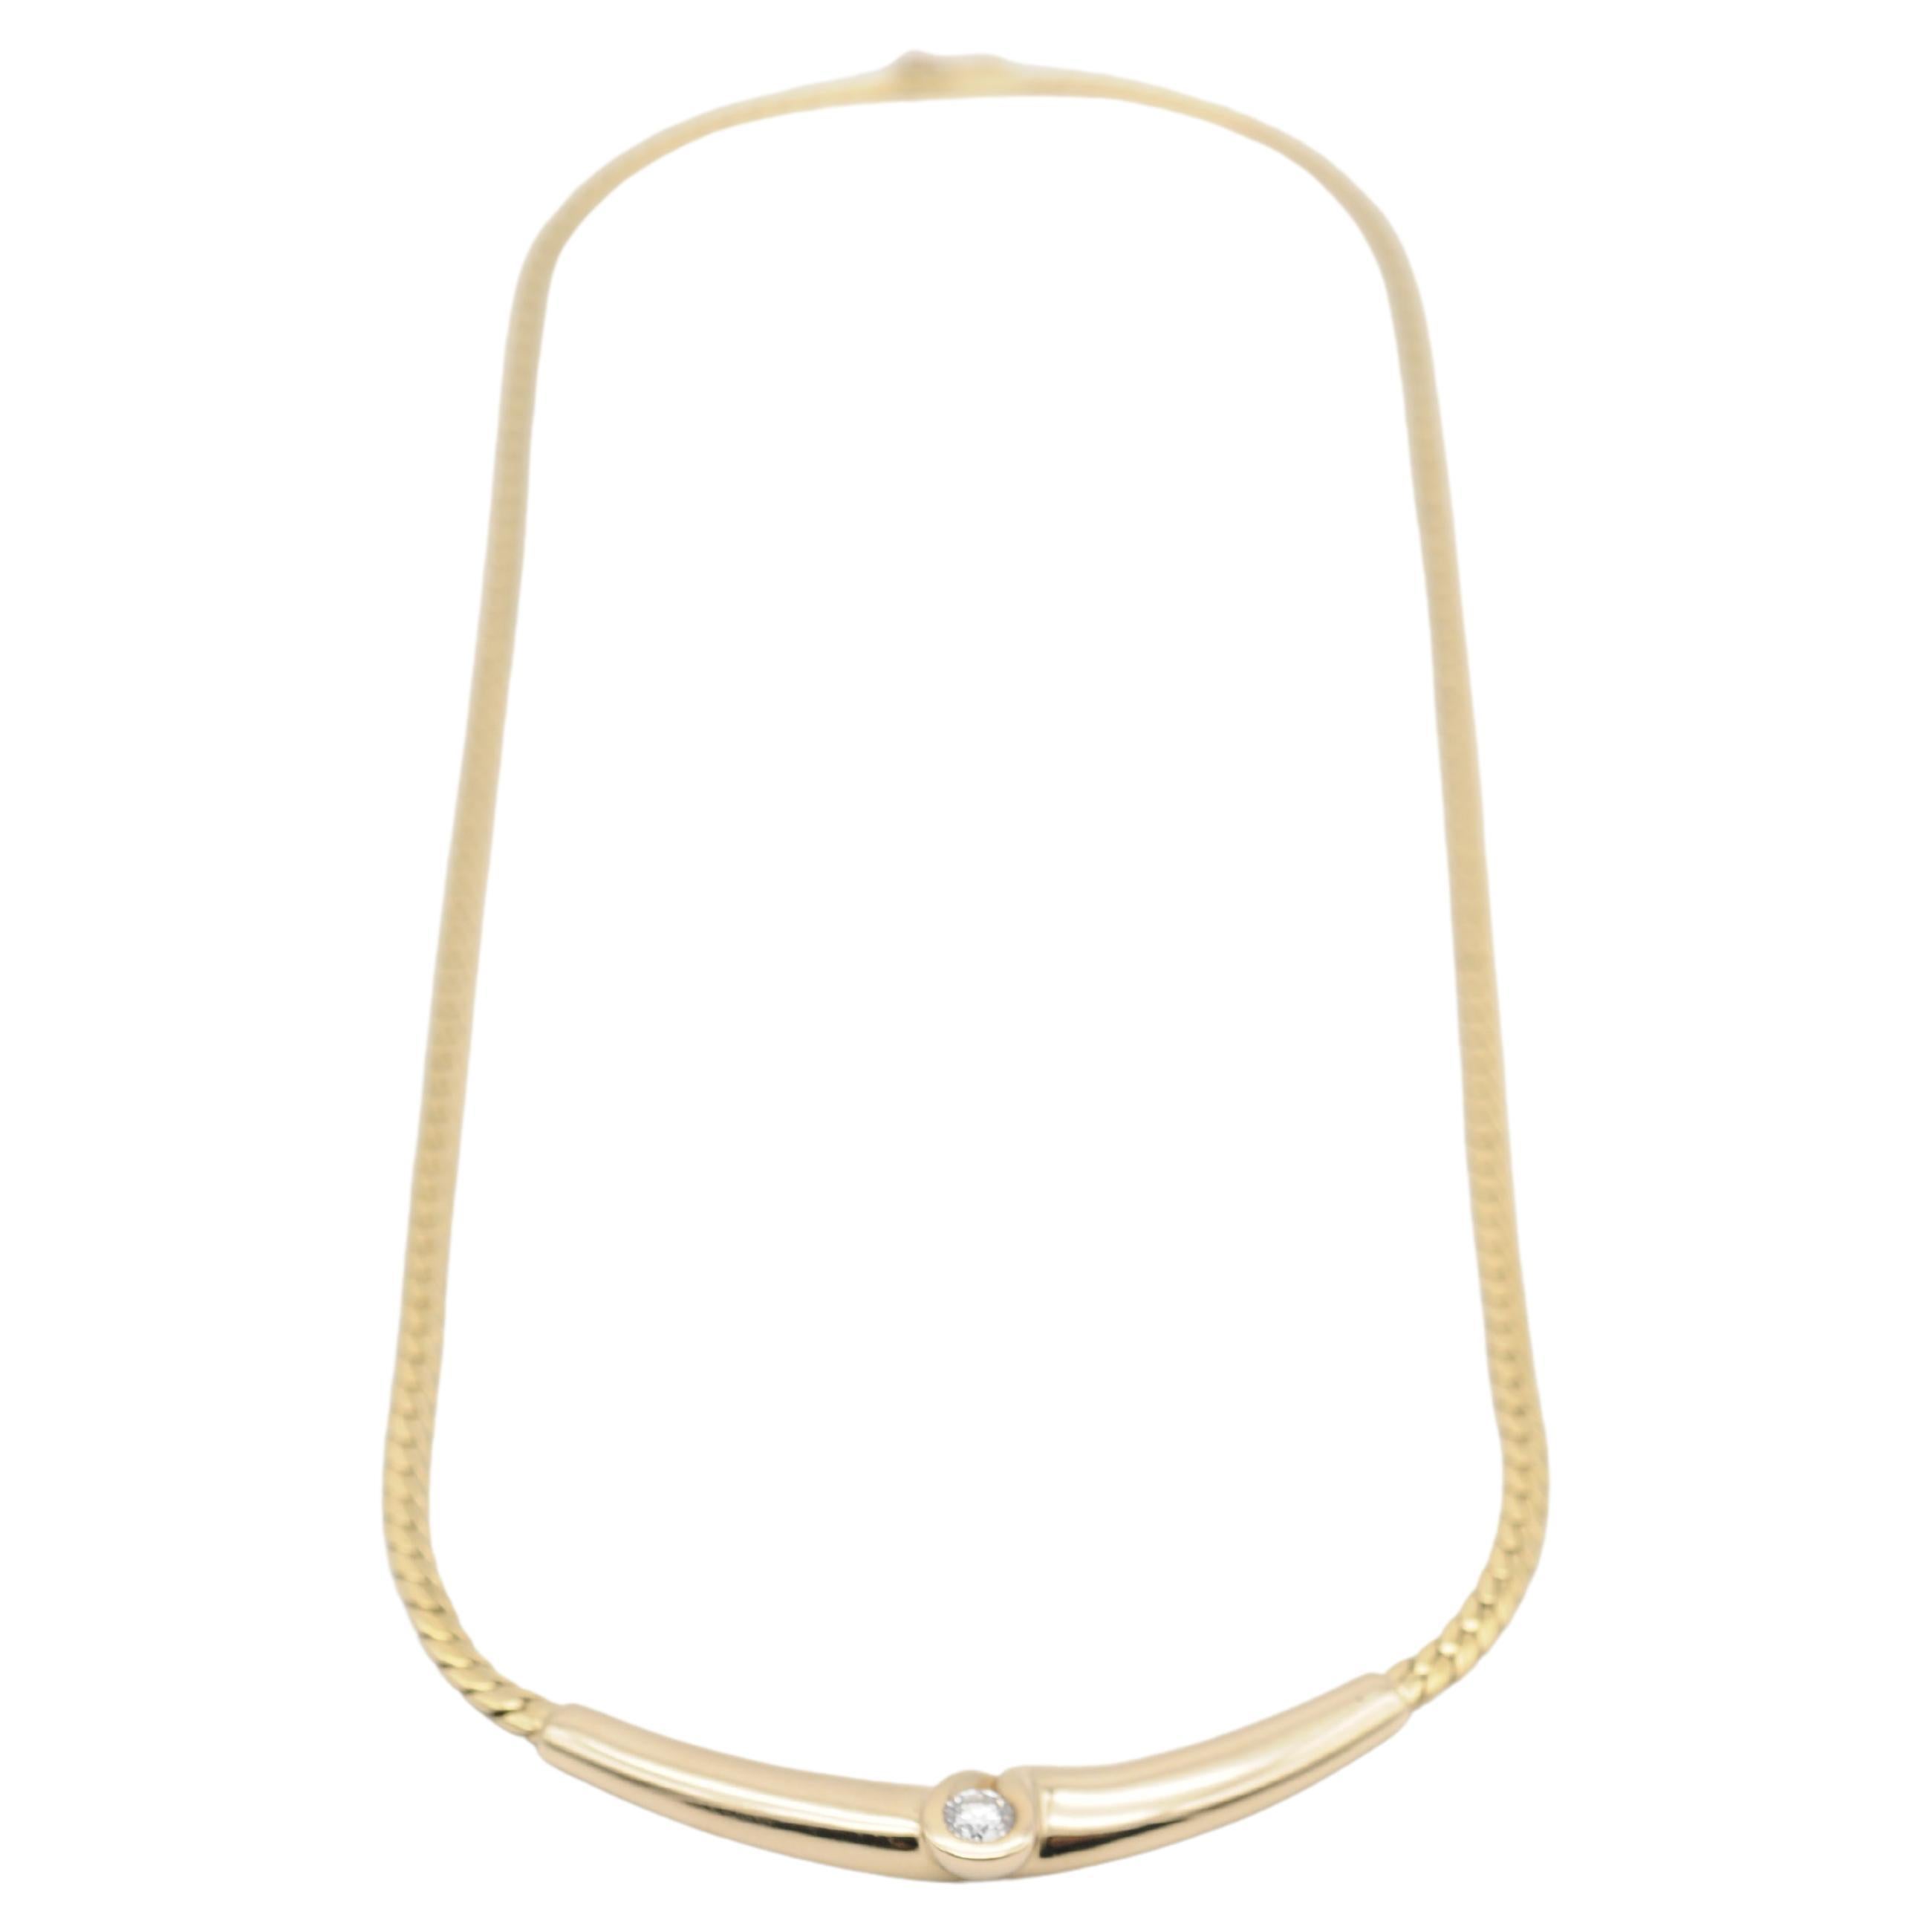 14K yellow gold necklace / necklace with solitaire 0.25 carat diamond For Sale